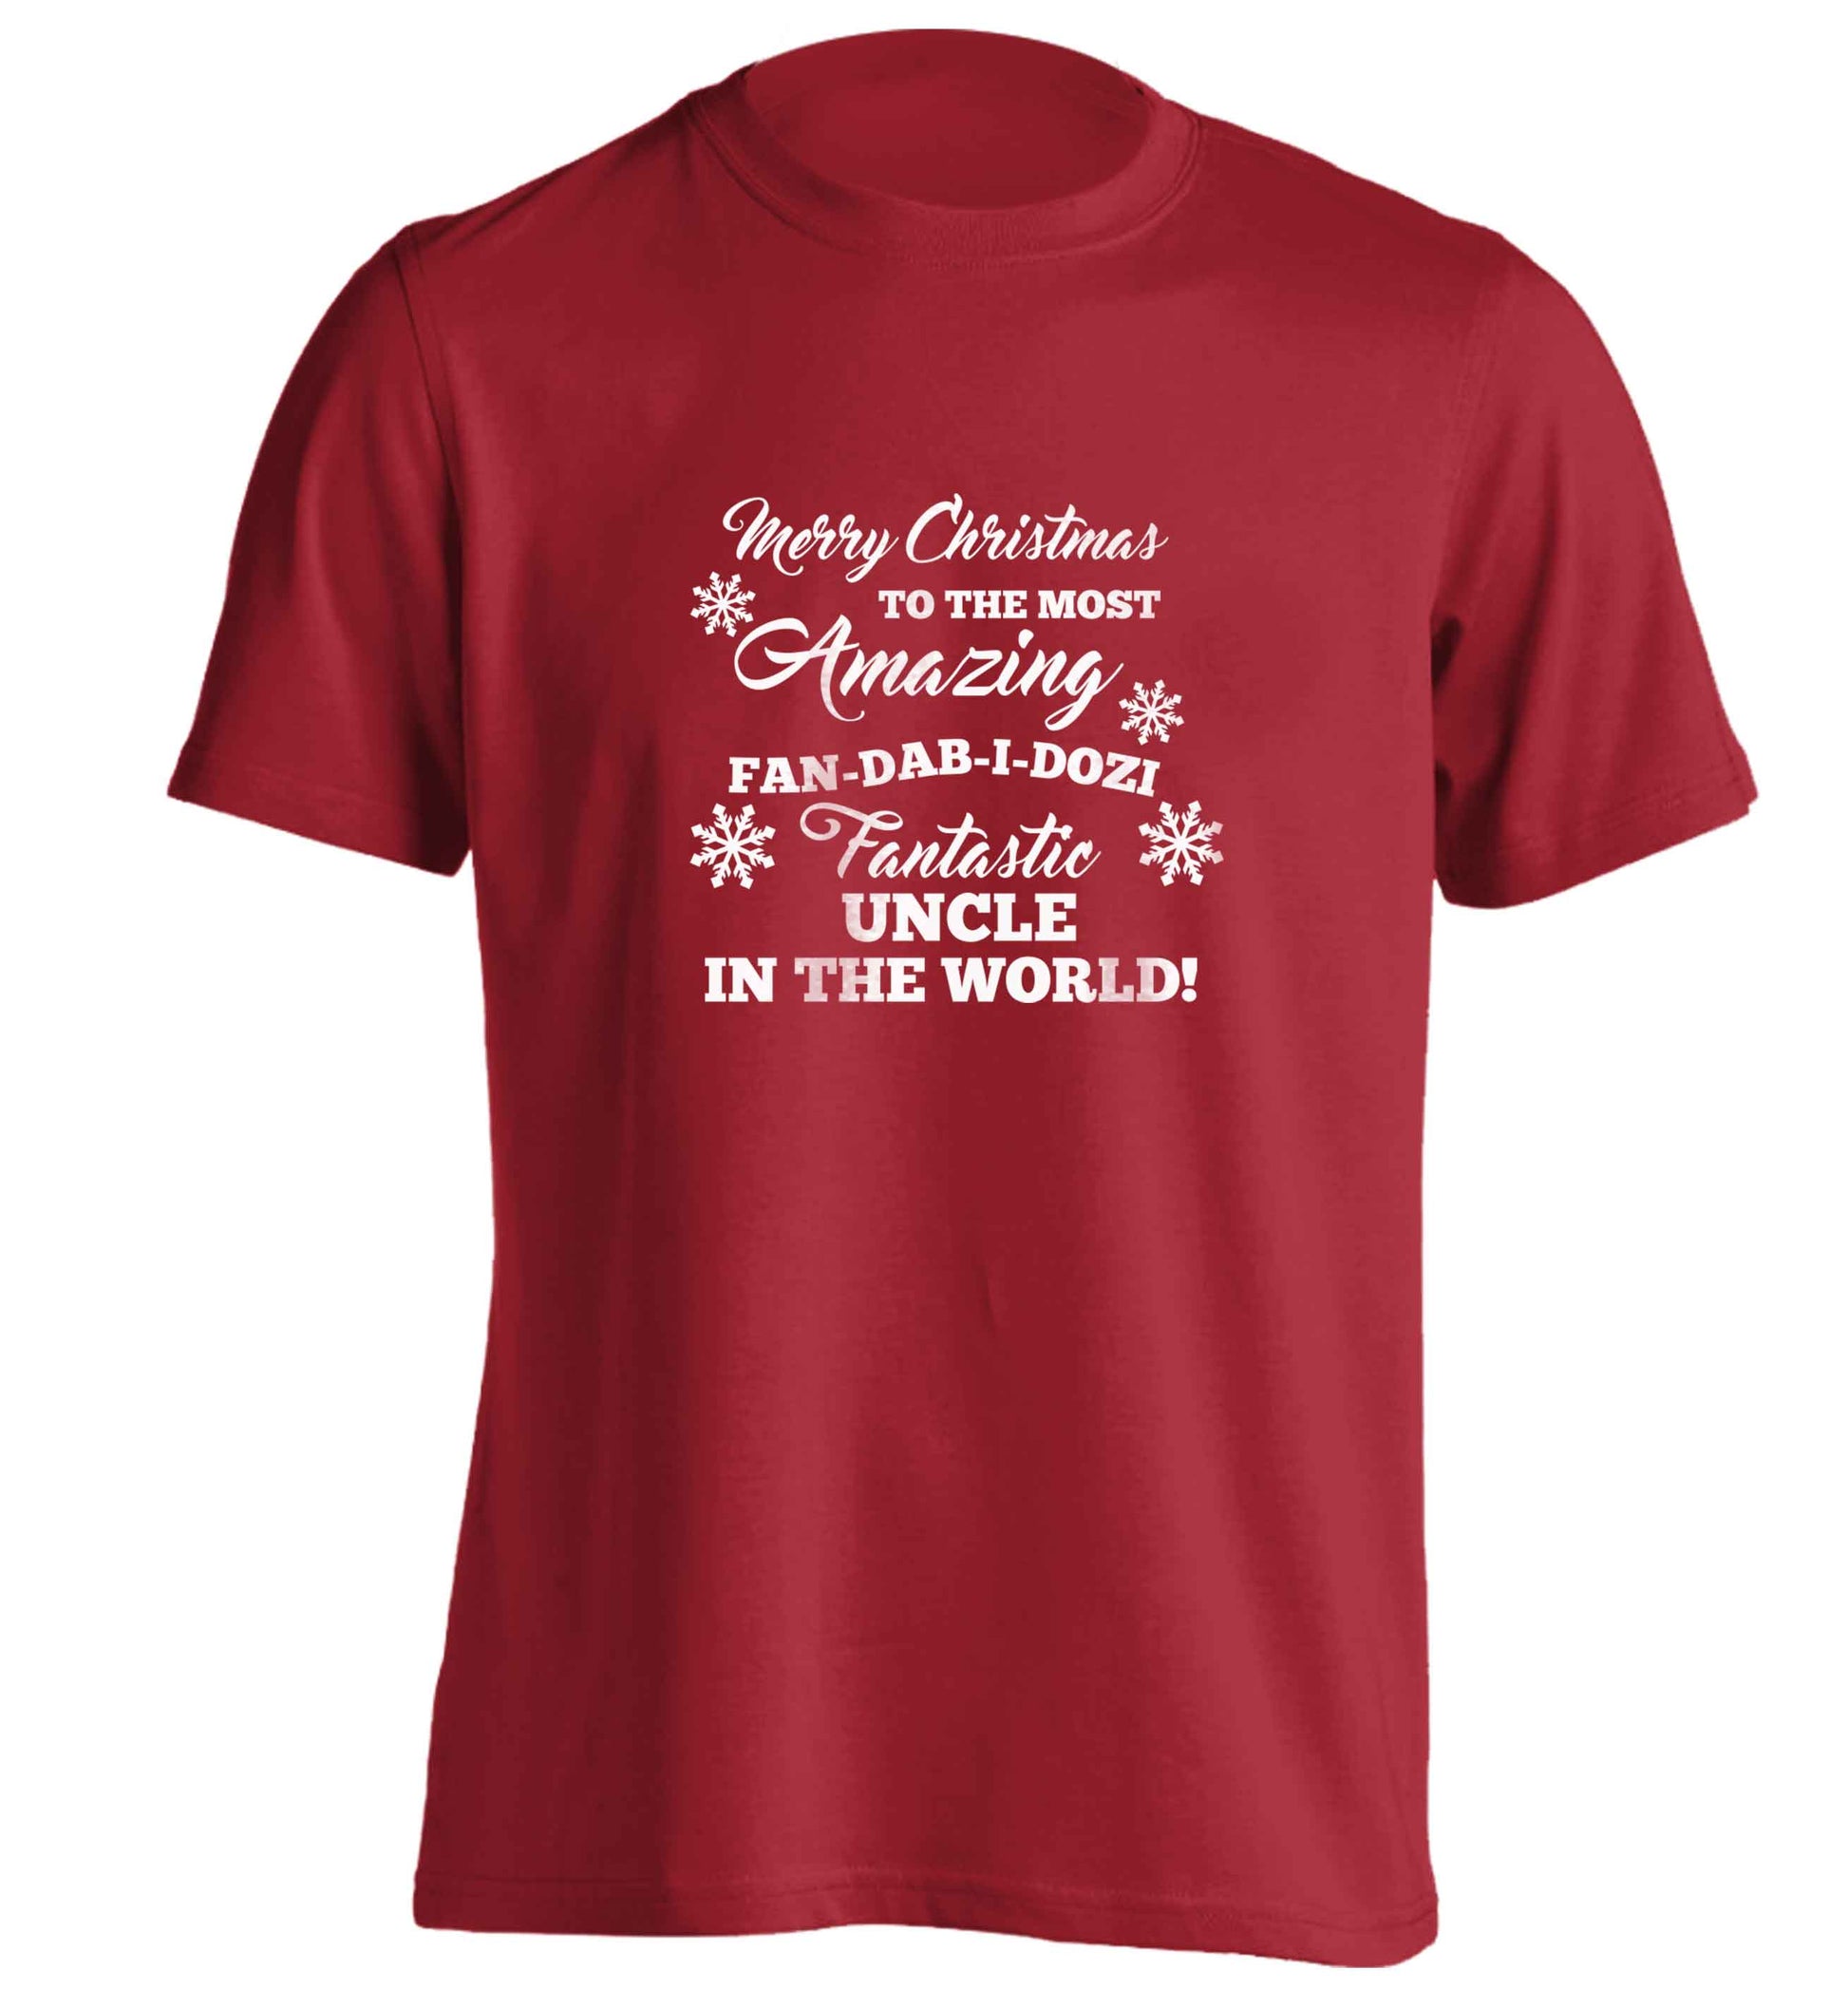 Merry Christmas to the most amazing fan-dab-i-dozi fantasic Uncle in the world adults unisex red Tshirt 2XL